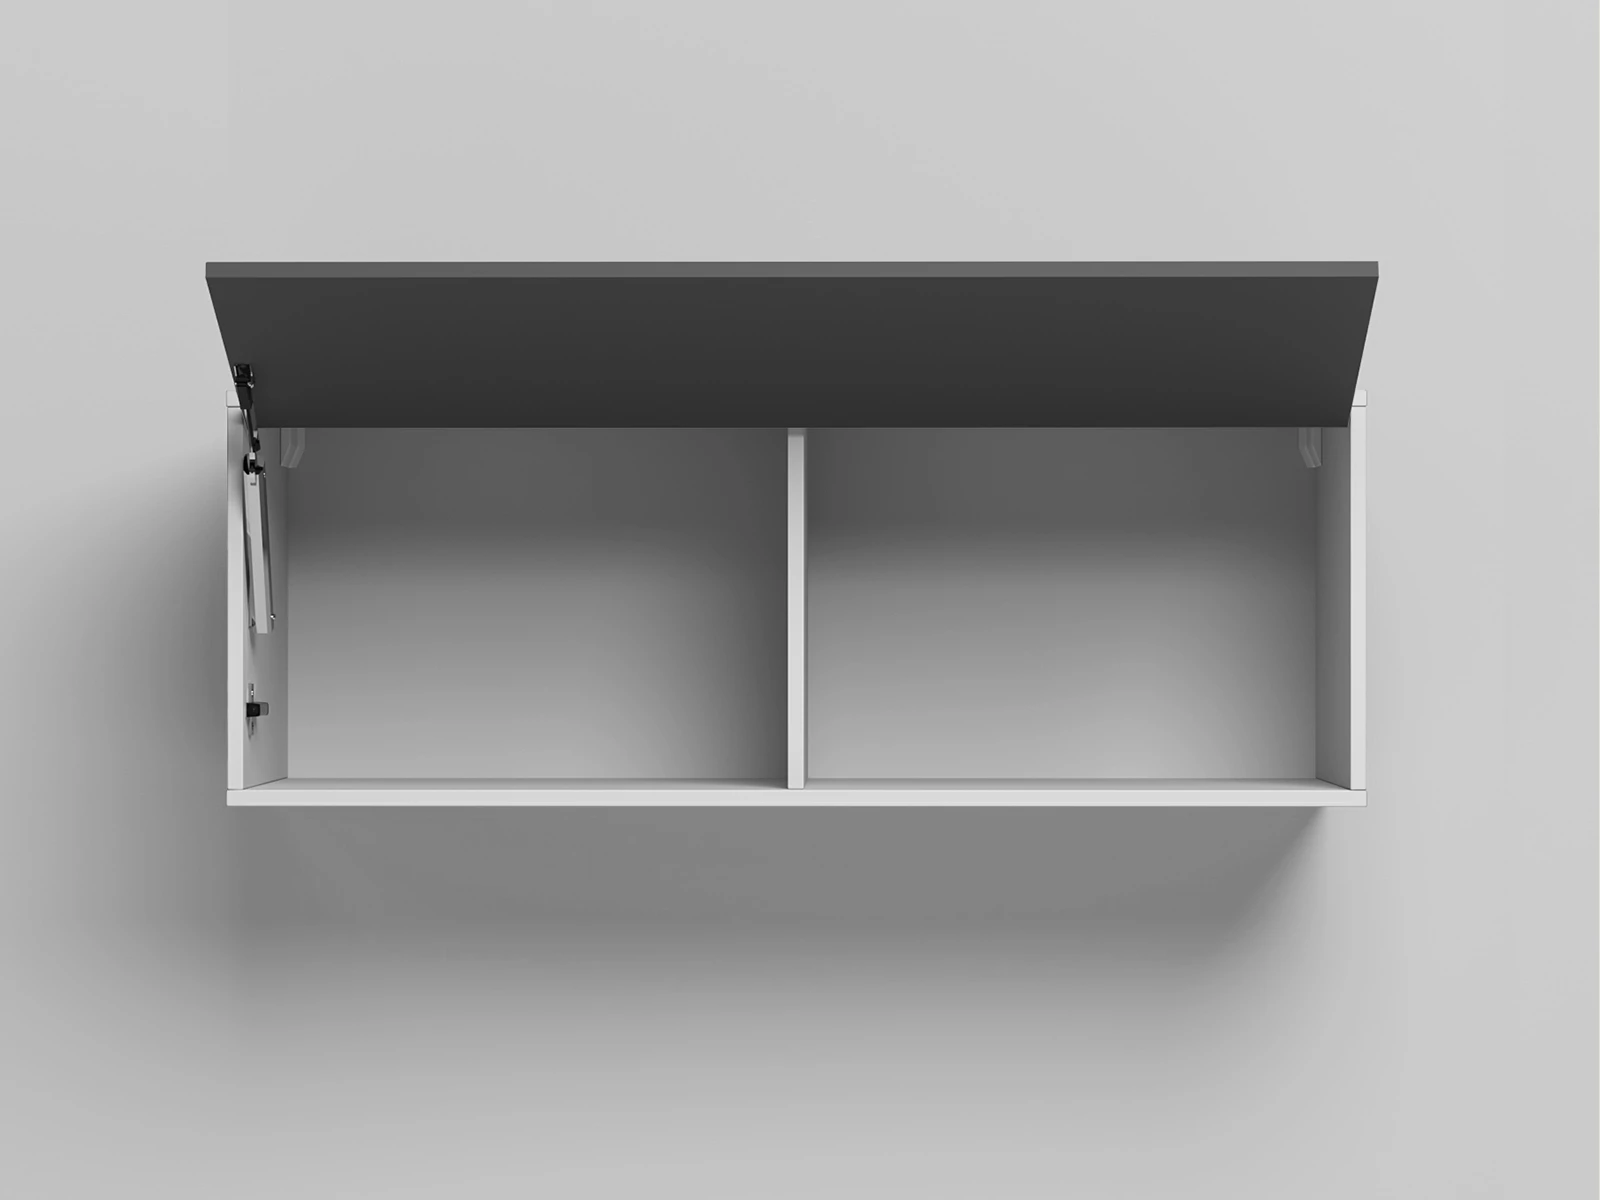 2 Wall cabinet - One door White / Anthracite